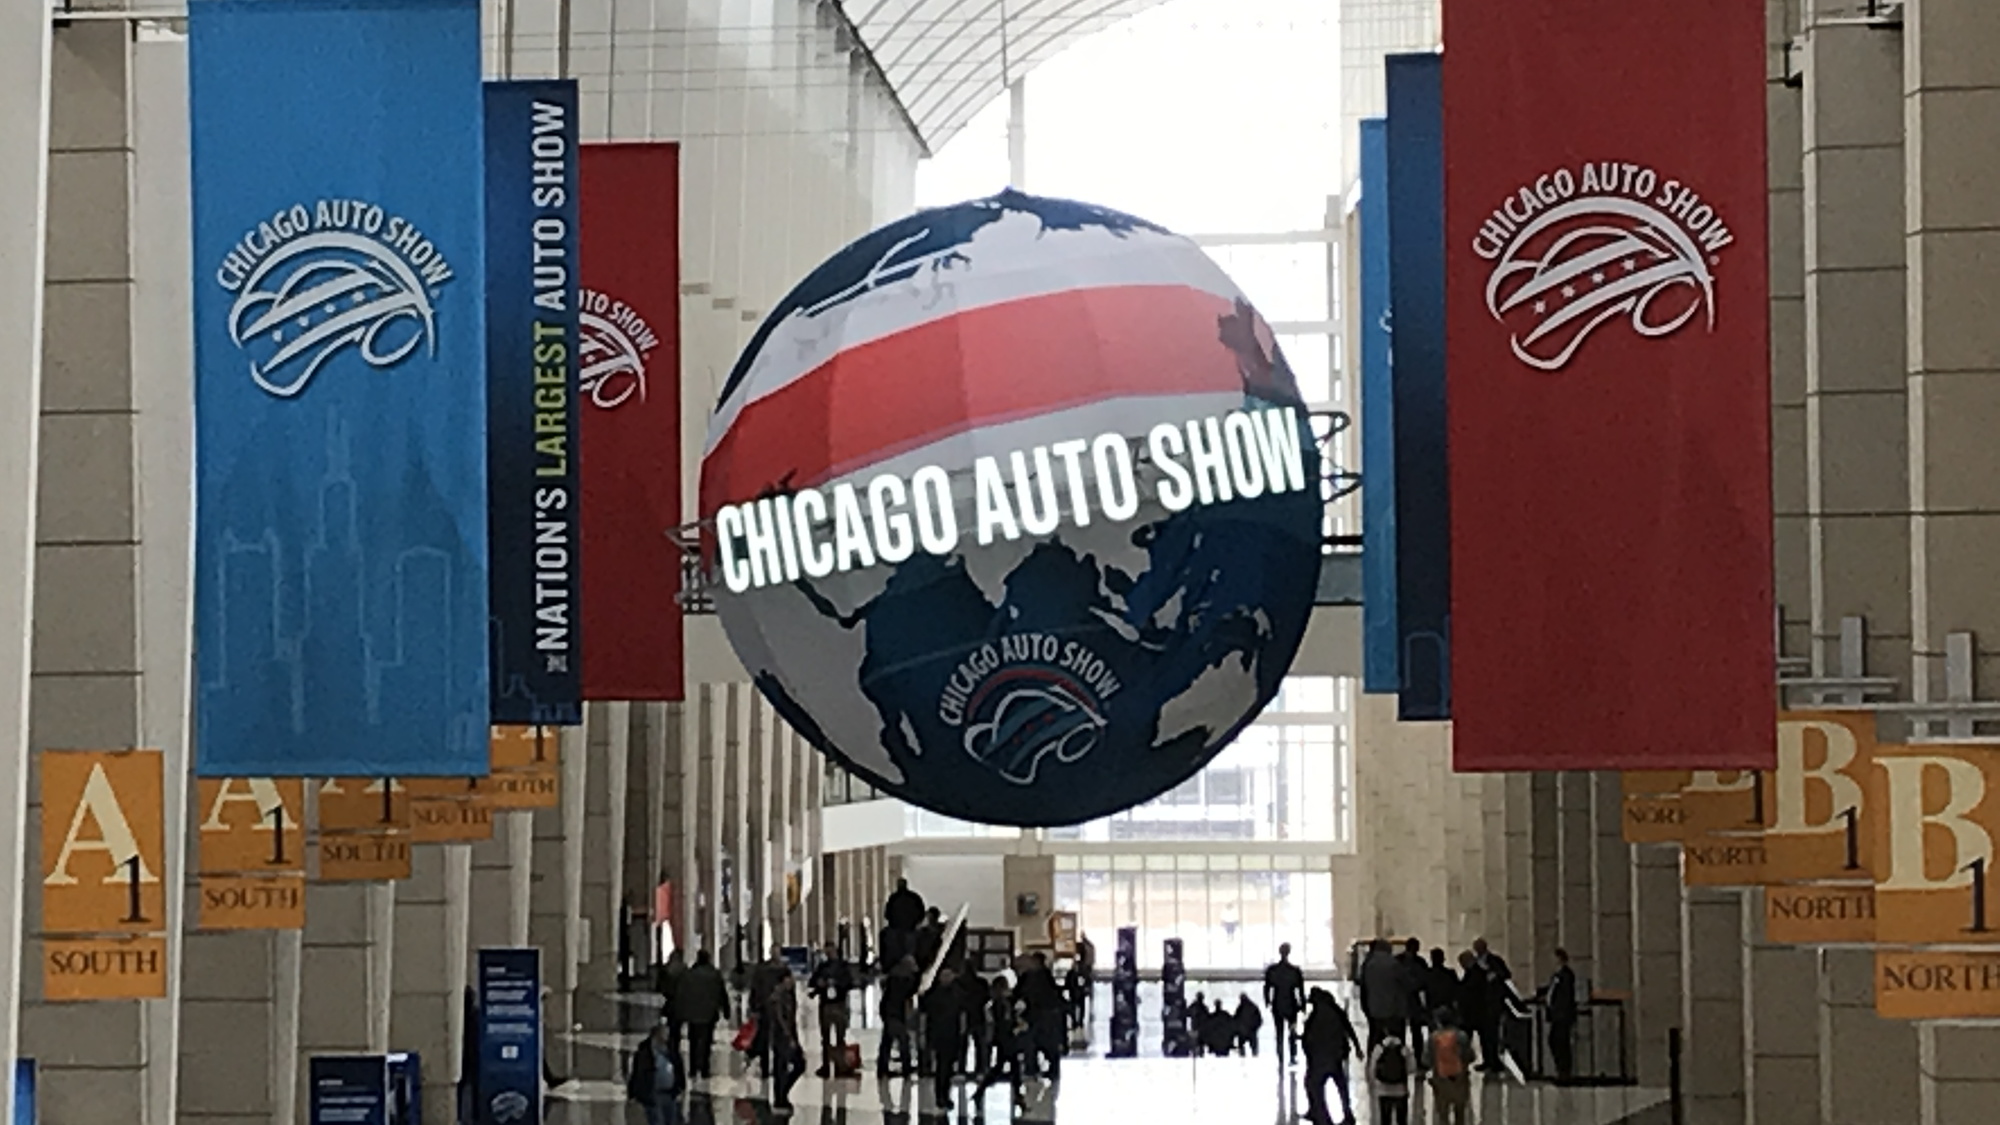 Chicago Auto Show Latest News from the Chicago Auto Show Motor